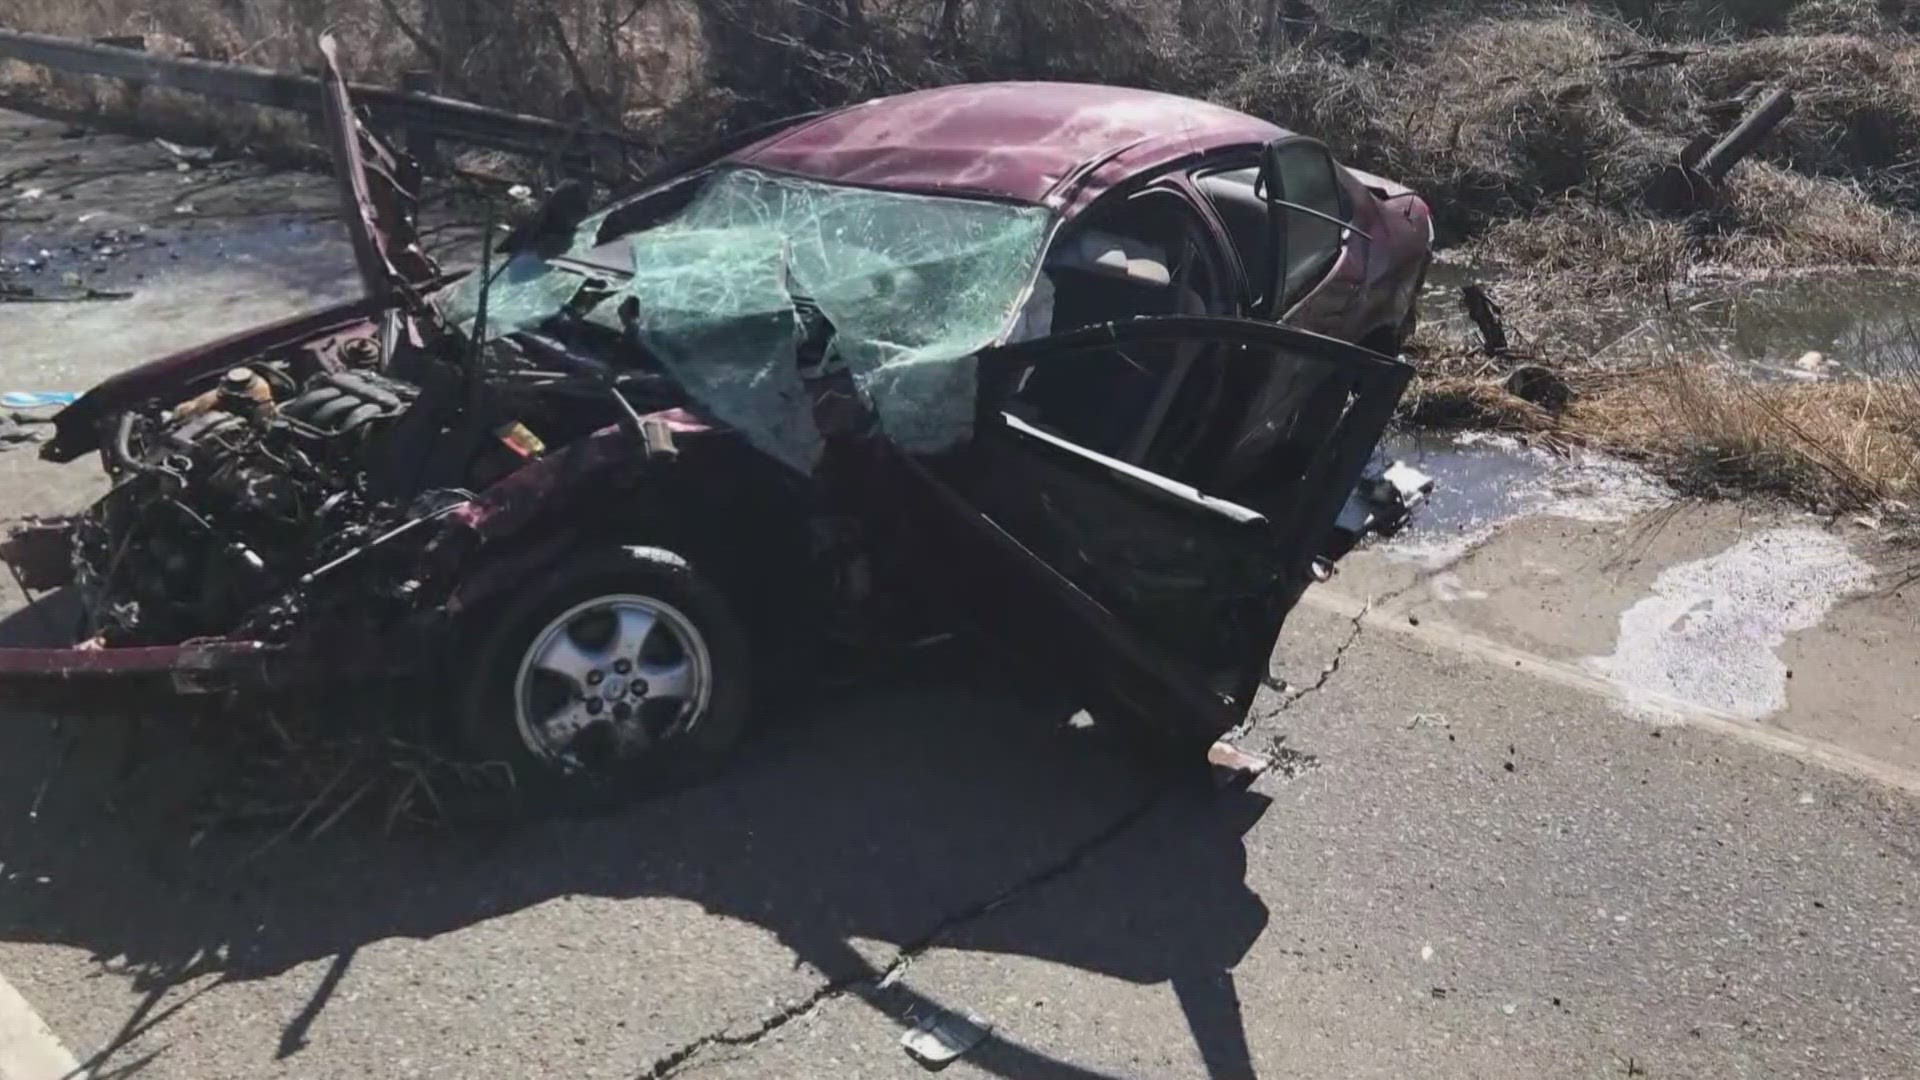 A 14-year-old boy was likely speeding when he struck a guardrail, veered into oncoming traffic, and hit a minivan, according to Commerce City Police.